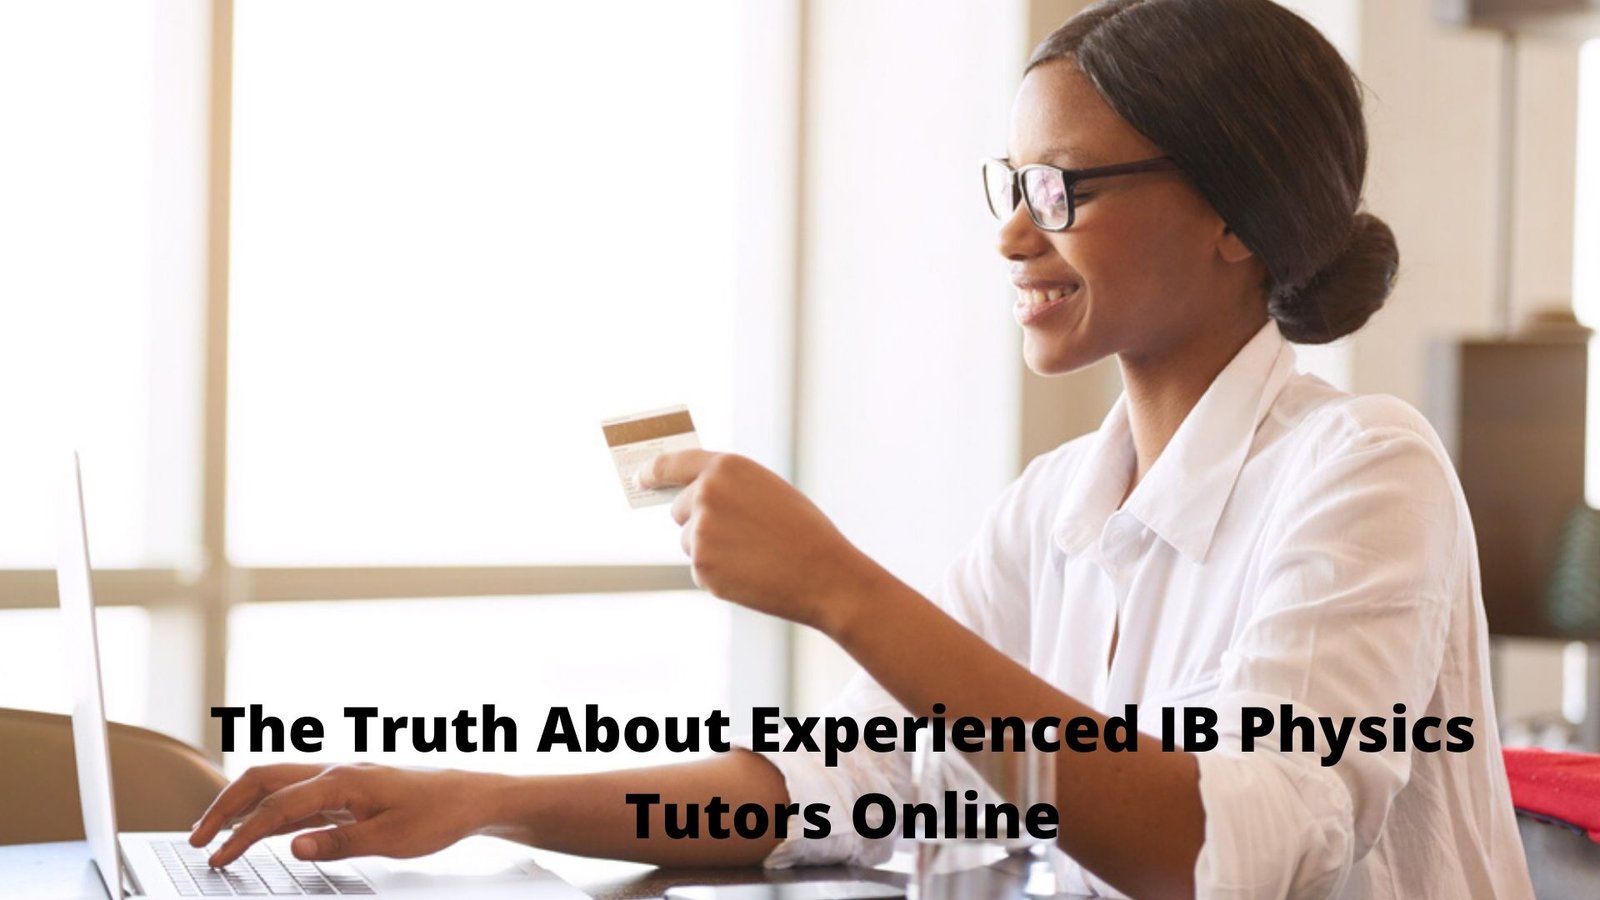 The Truth About Experienced IB Physics Tutors Online